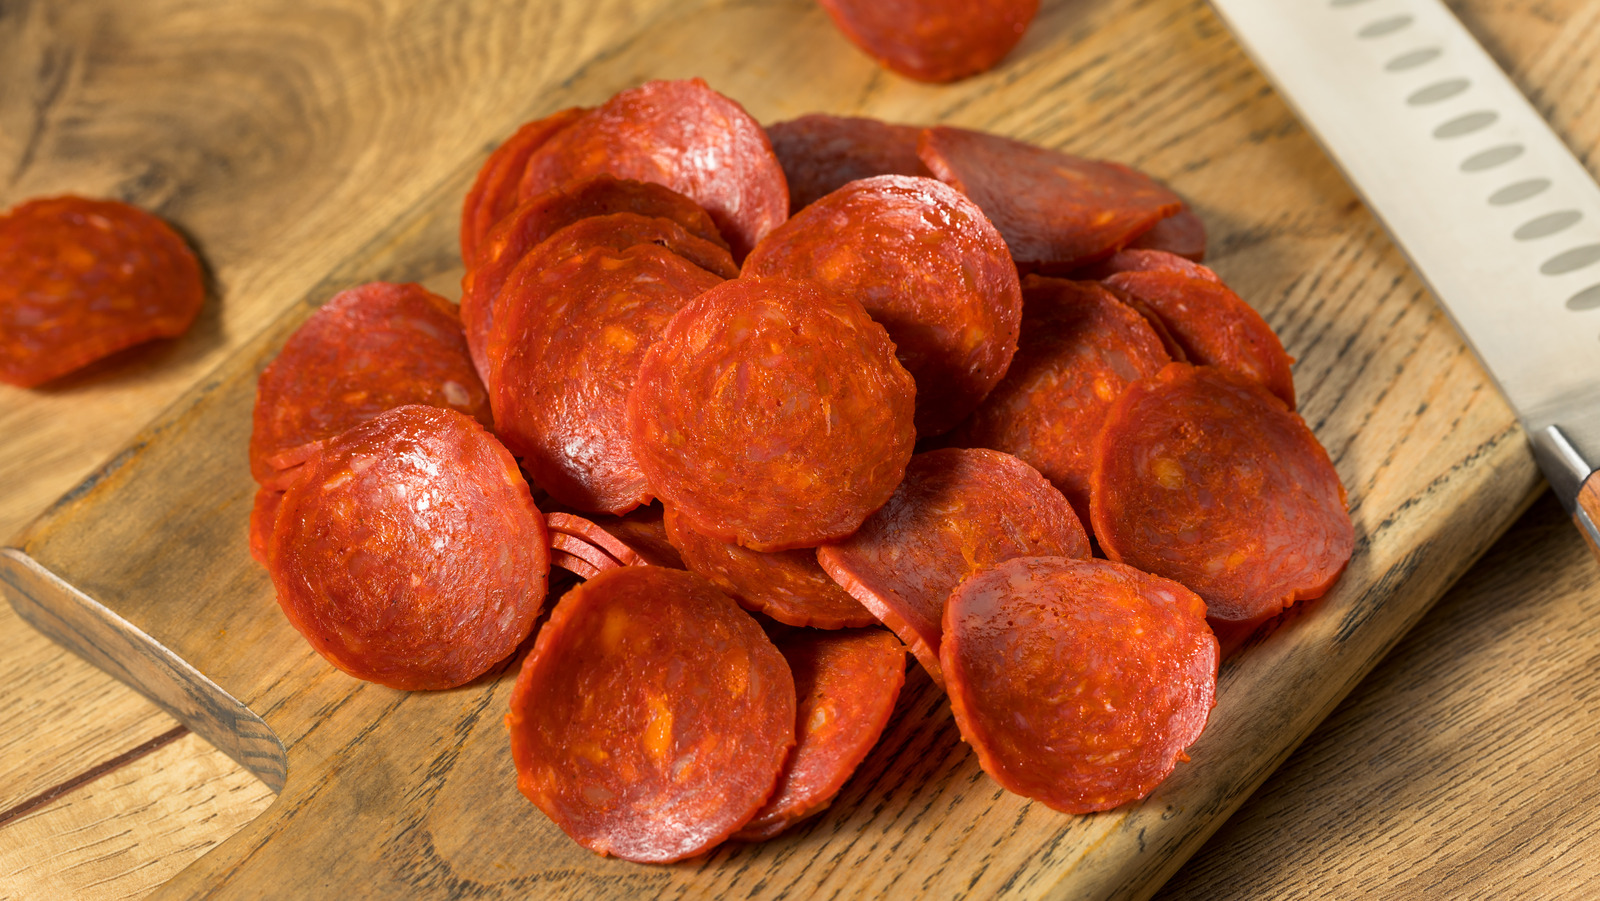 Old World Pepperoni Might Not Actually Be What You Expect